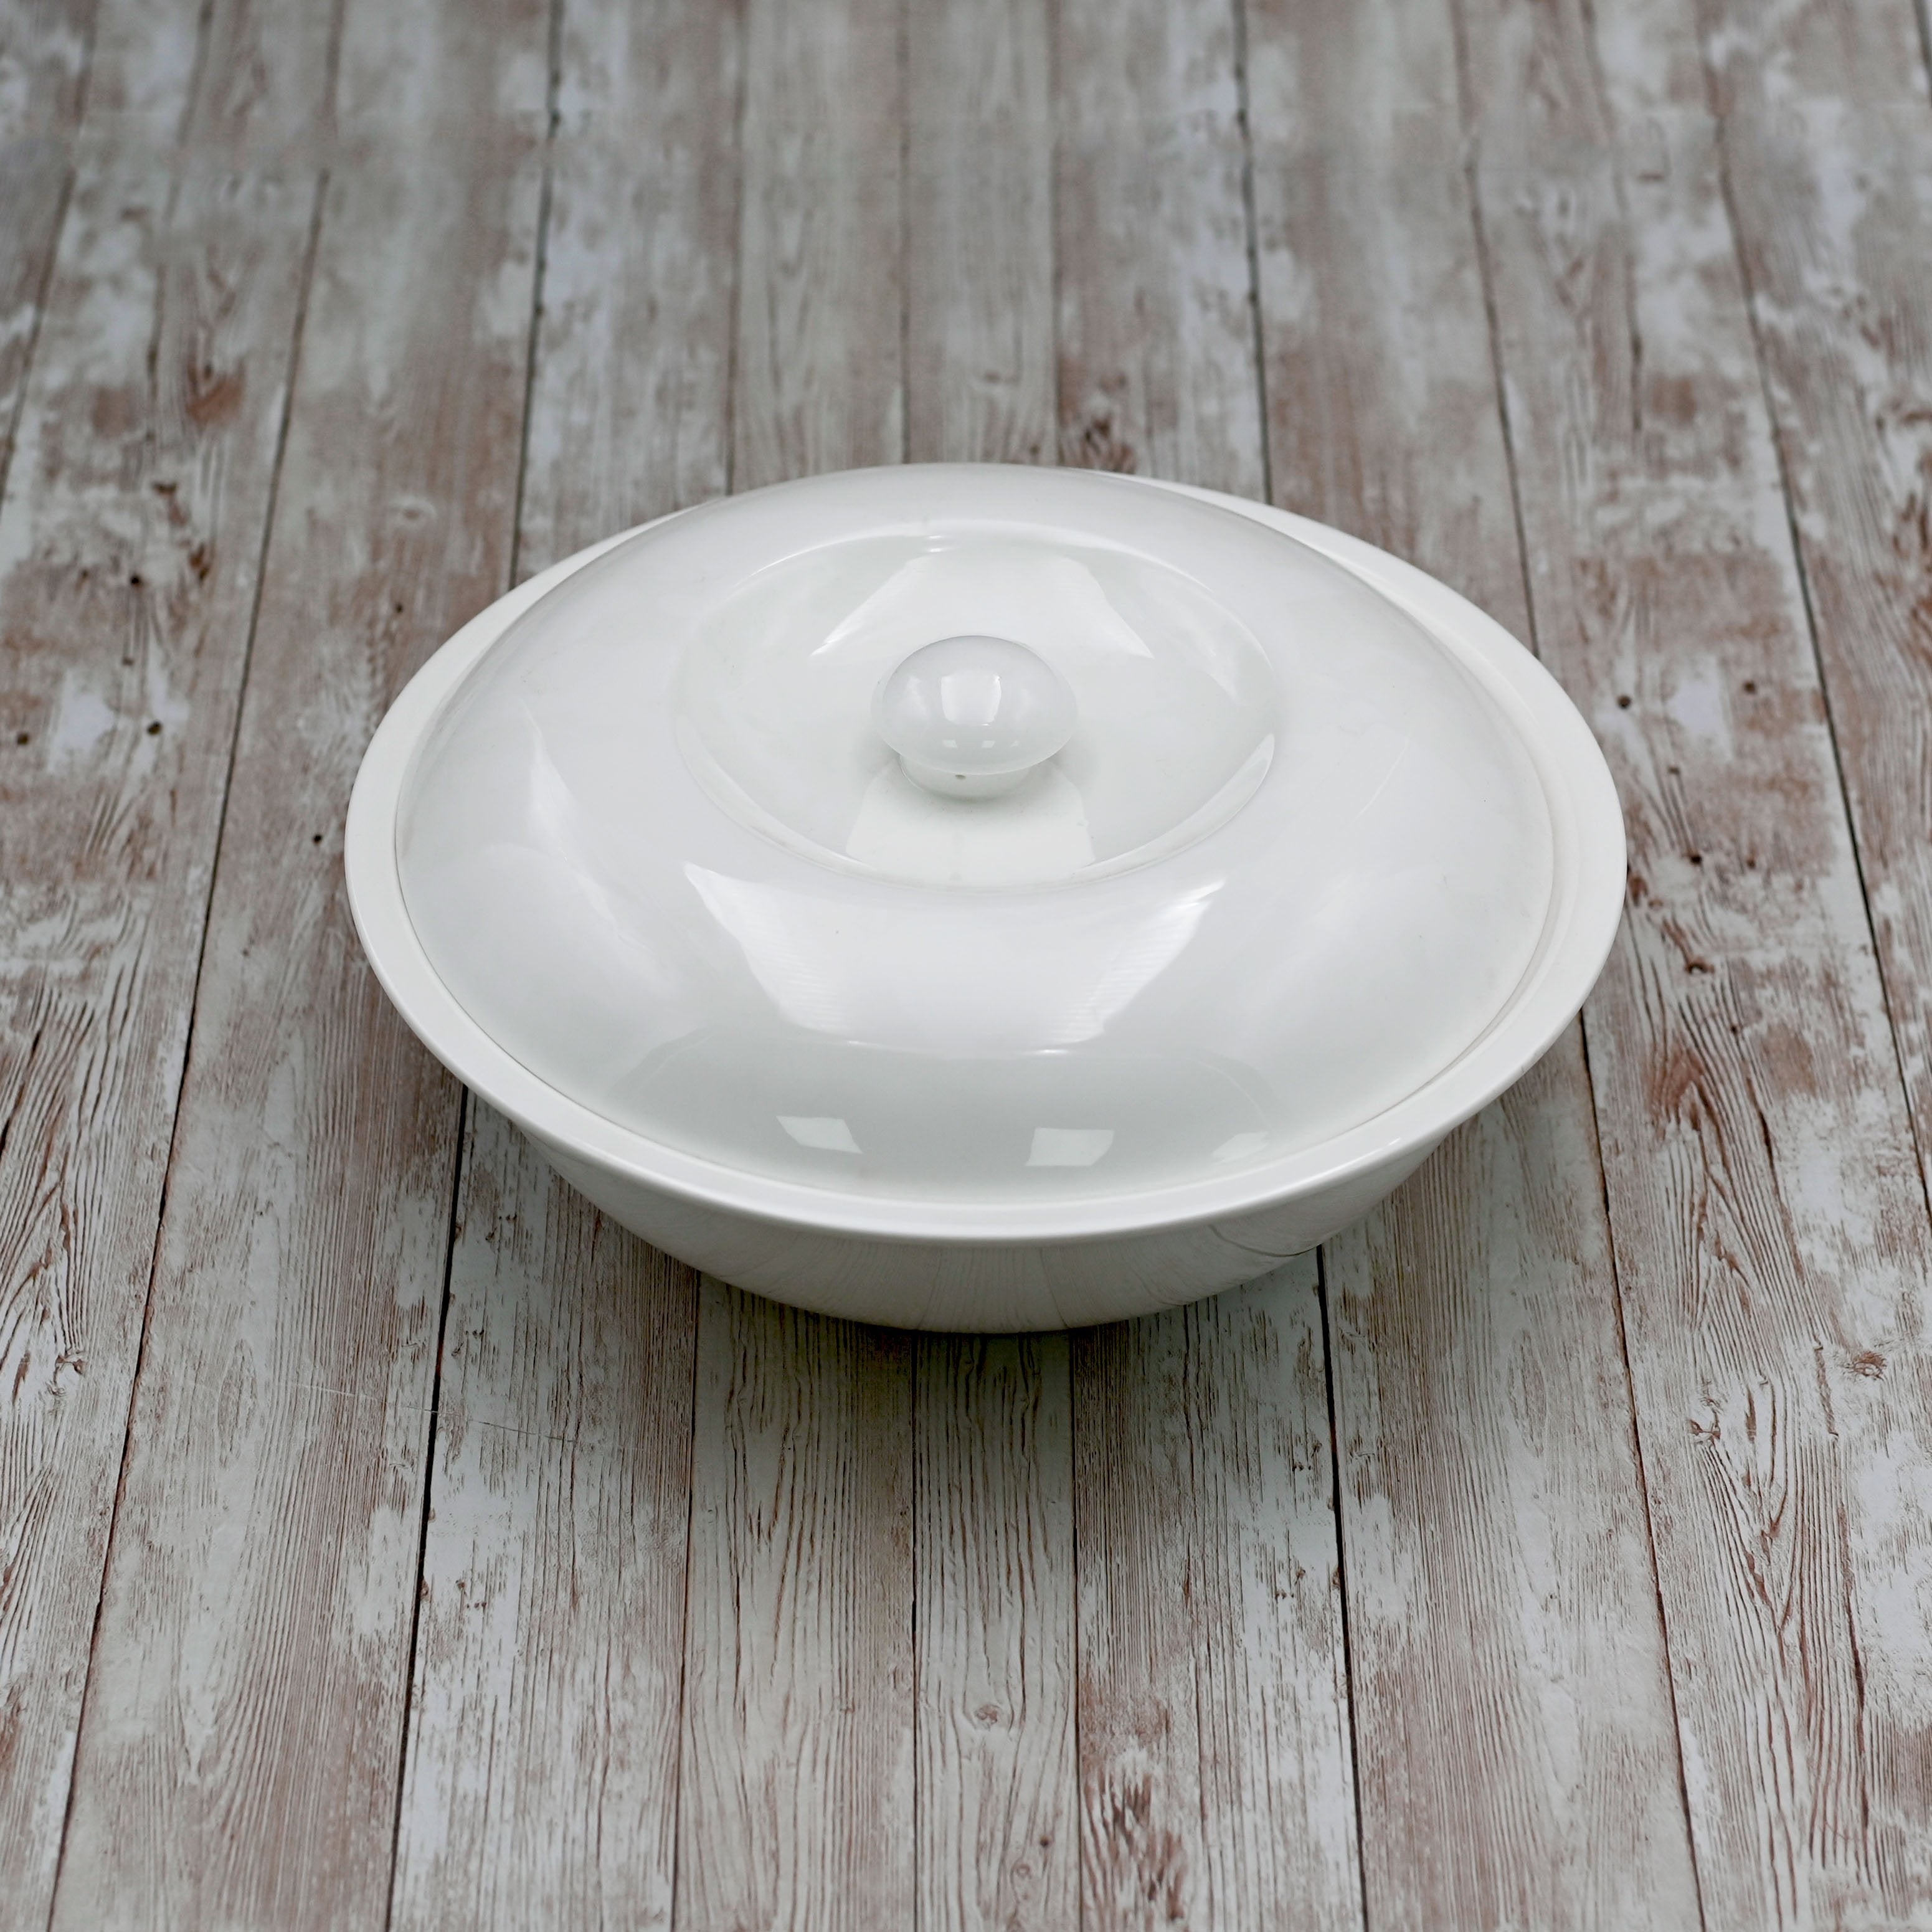 Large White 10" inch | Bowl With Lid 57 Oz |